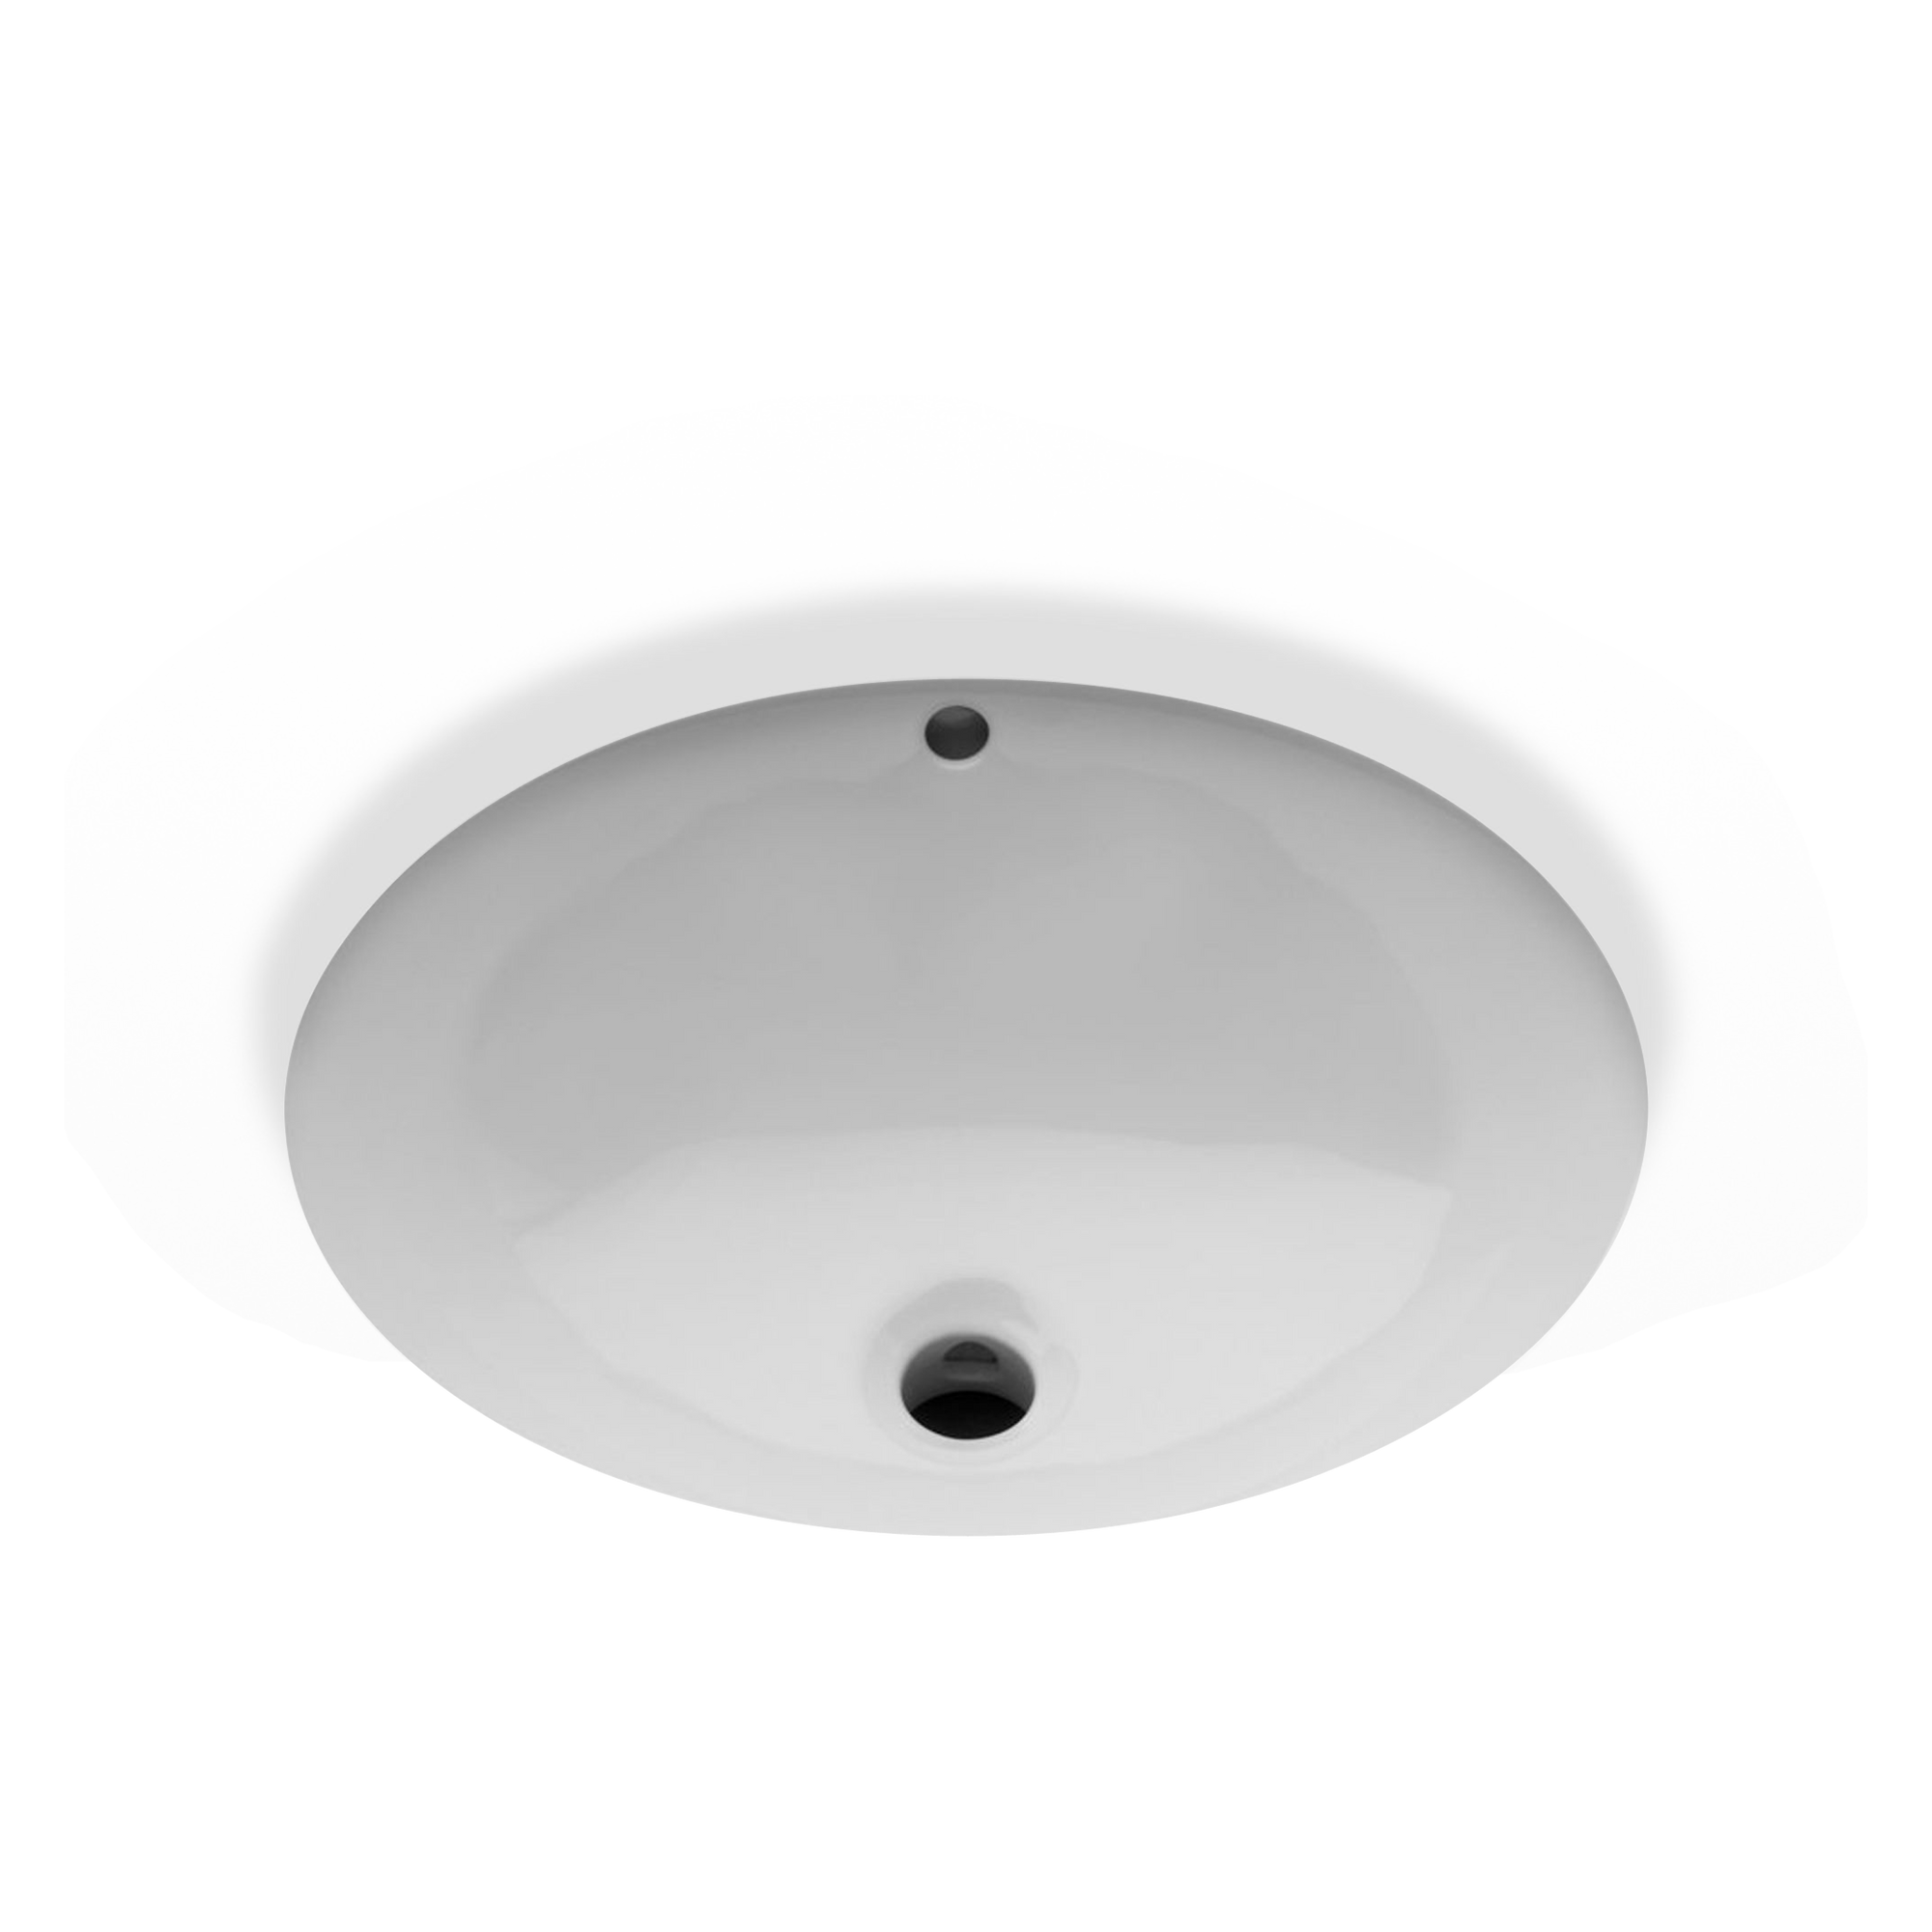 The Waterworks Savoy 18X16 Basin is a clean and simple oval basin with overflow.